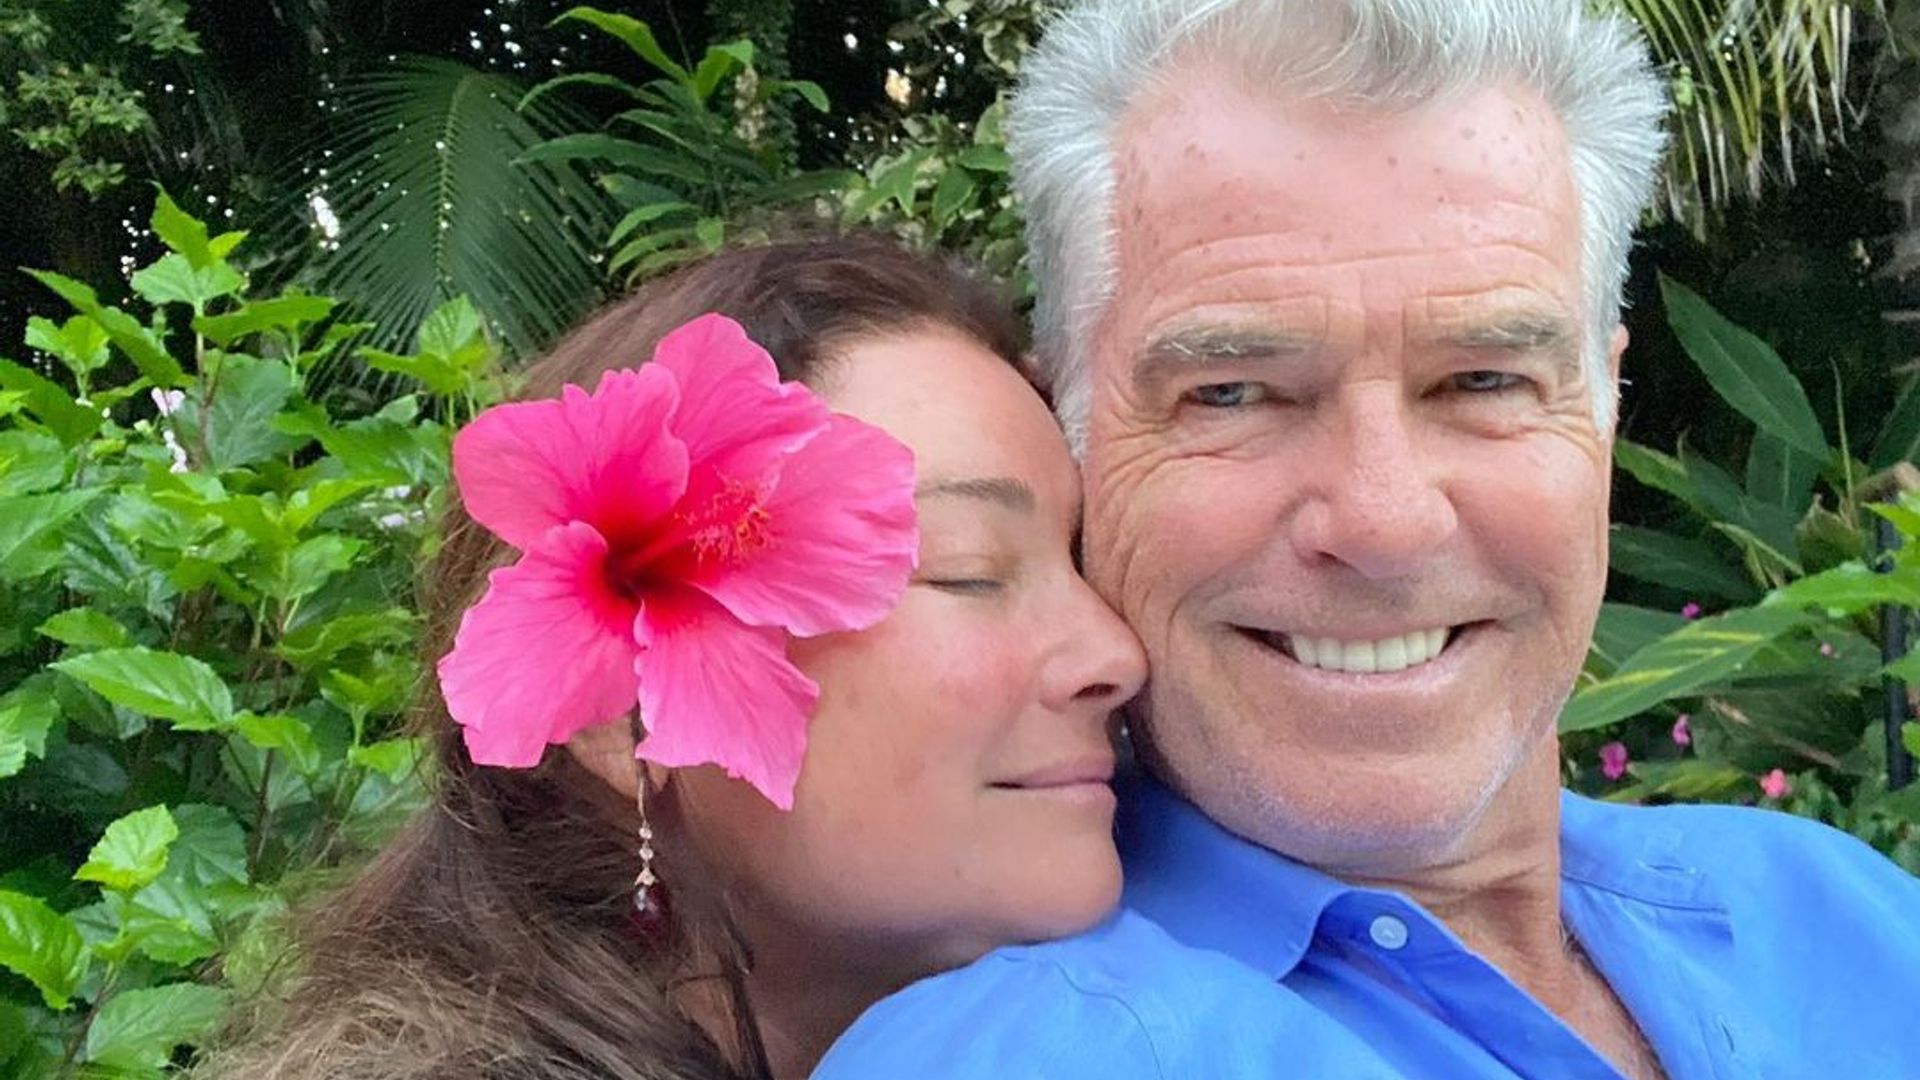 Pierce Brosnan and wife Keely take a selfie